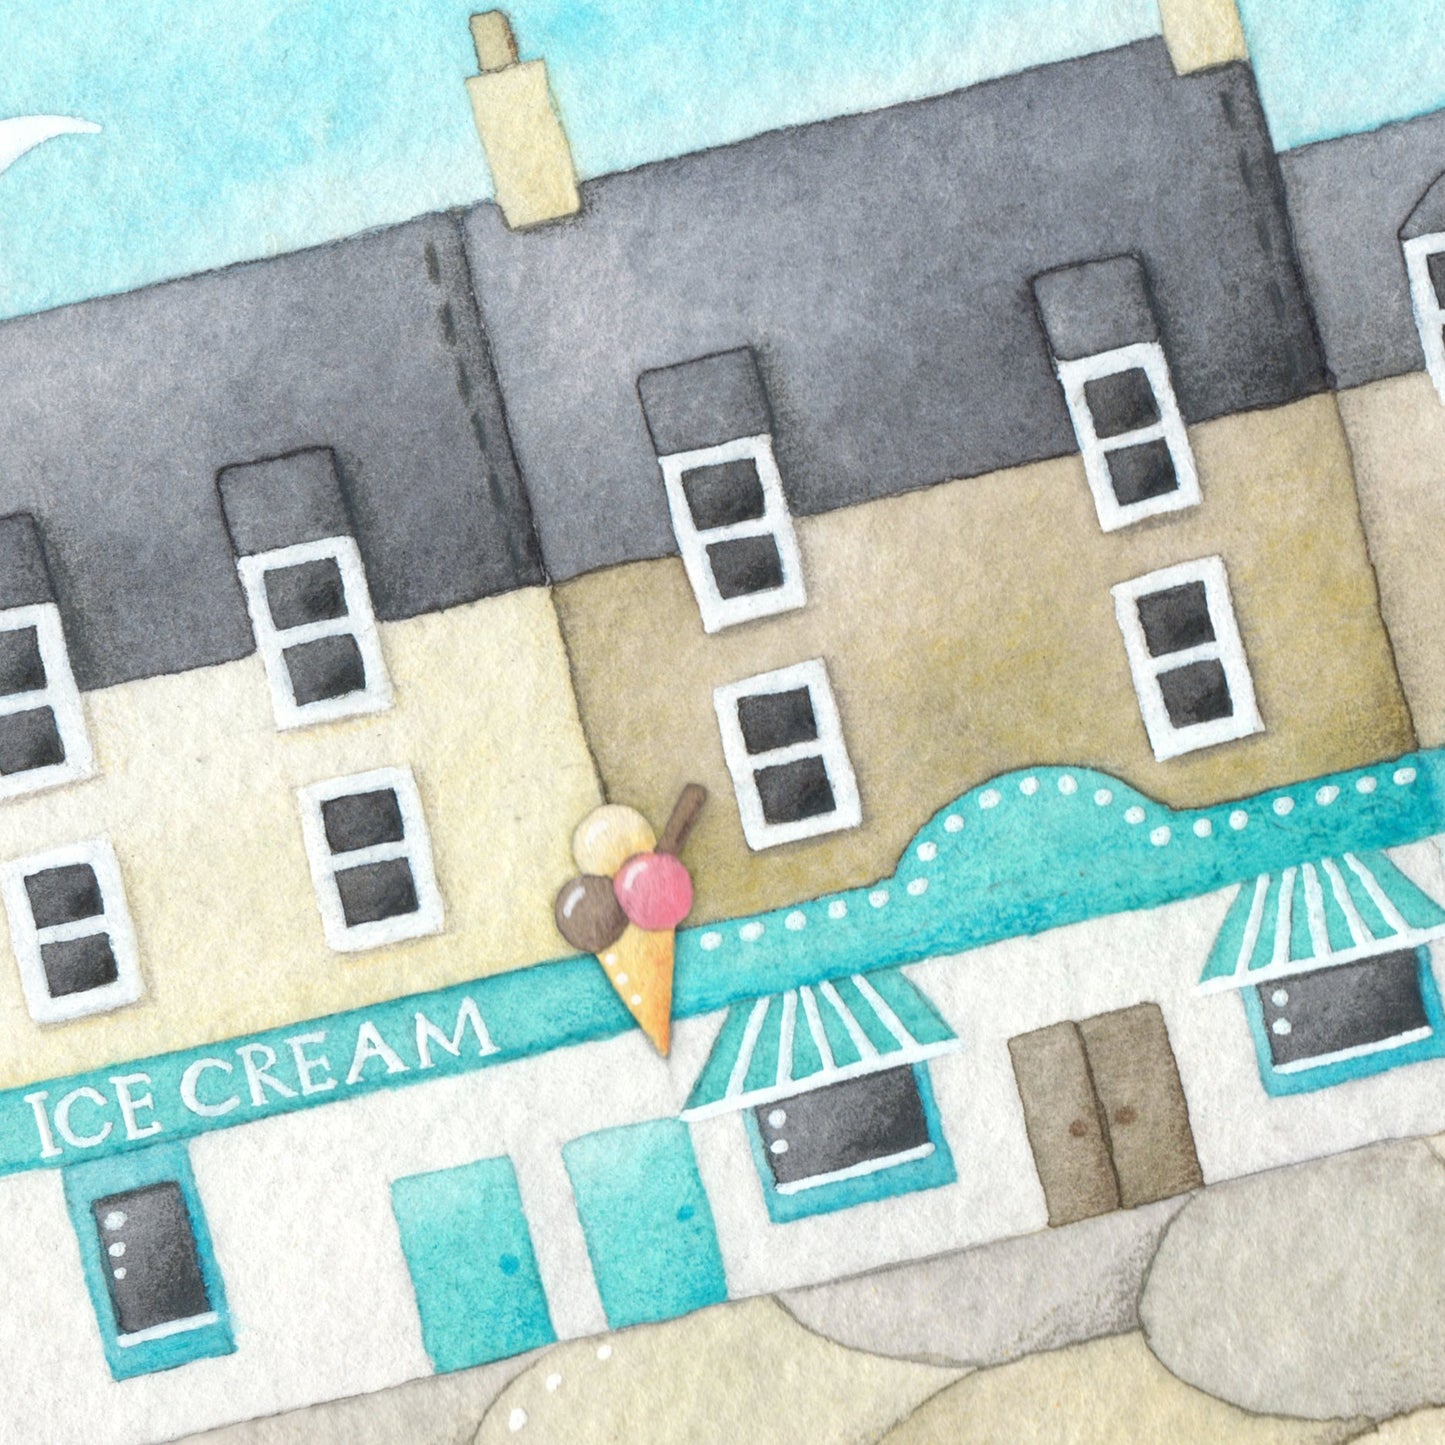 Fish and Chips at Anstruther - Seagull Seaside Watercolour Painting - Limited Edition Signed Print - East Neuk Beach Crafts